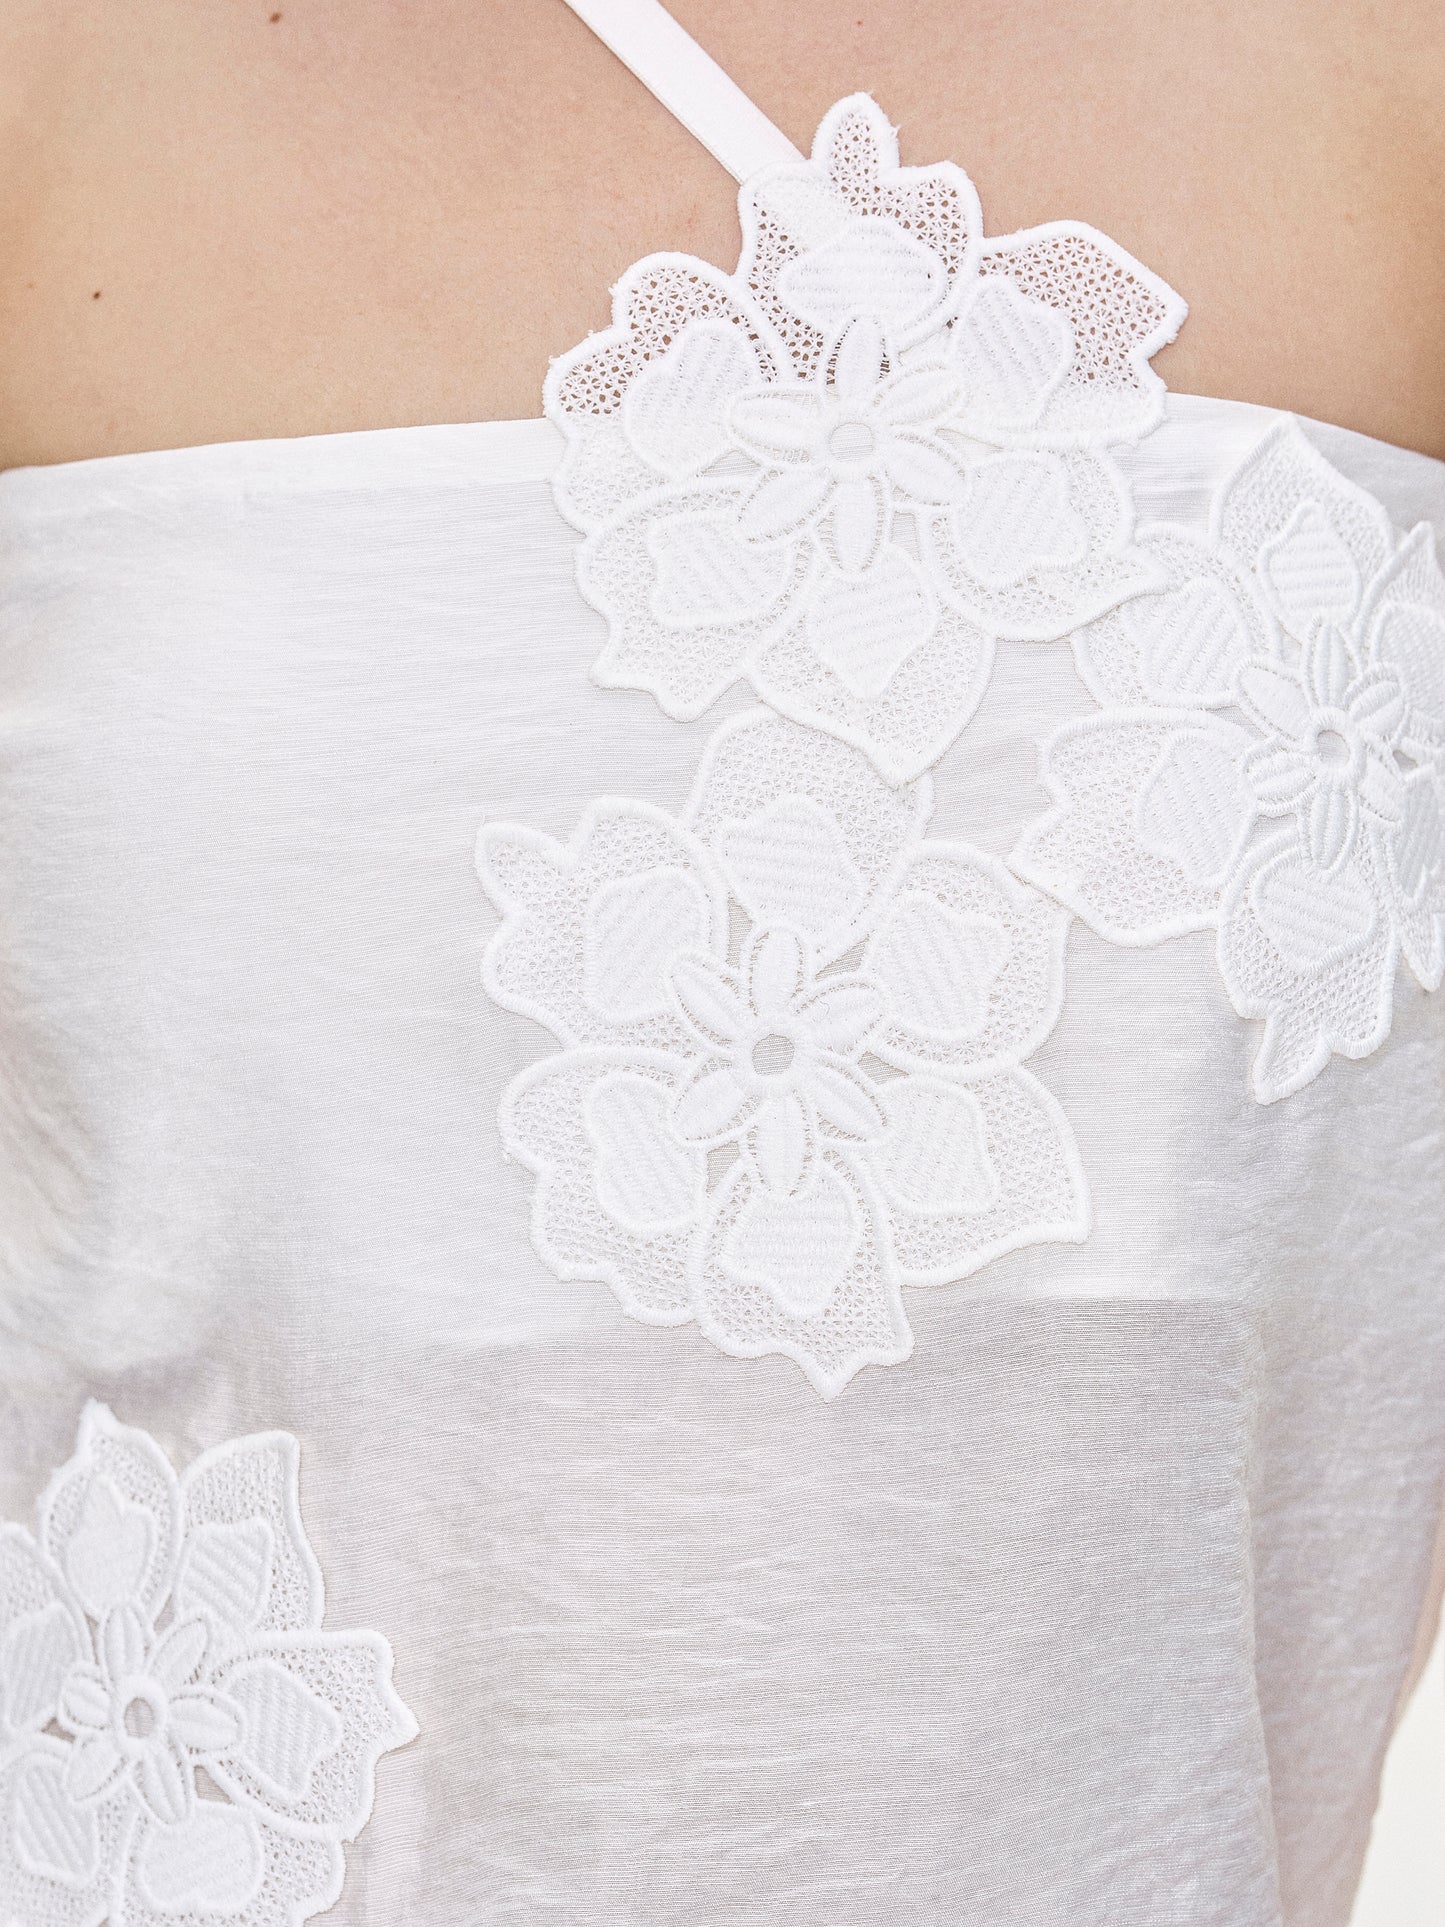 Botanical Guipure Lace Top, White